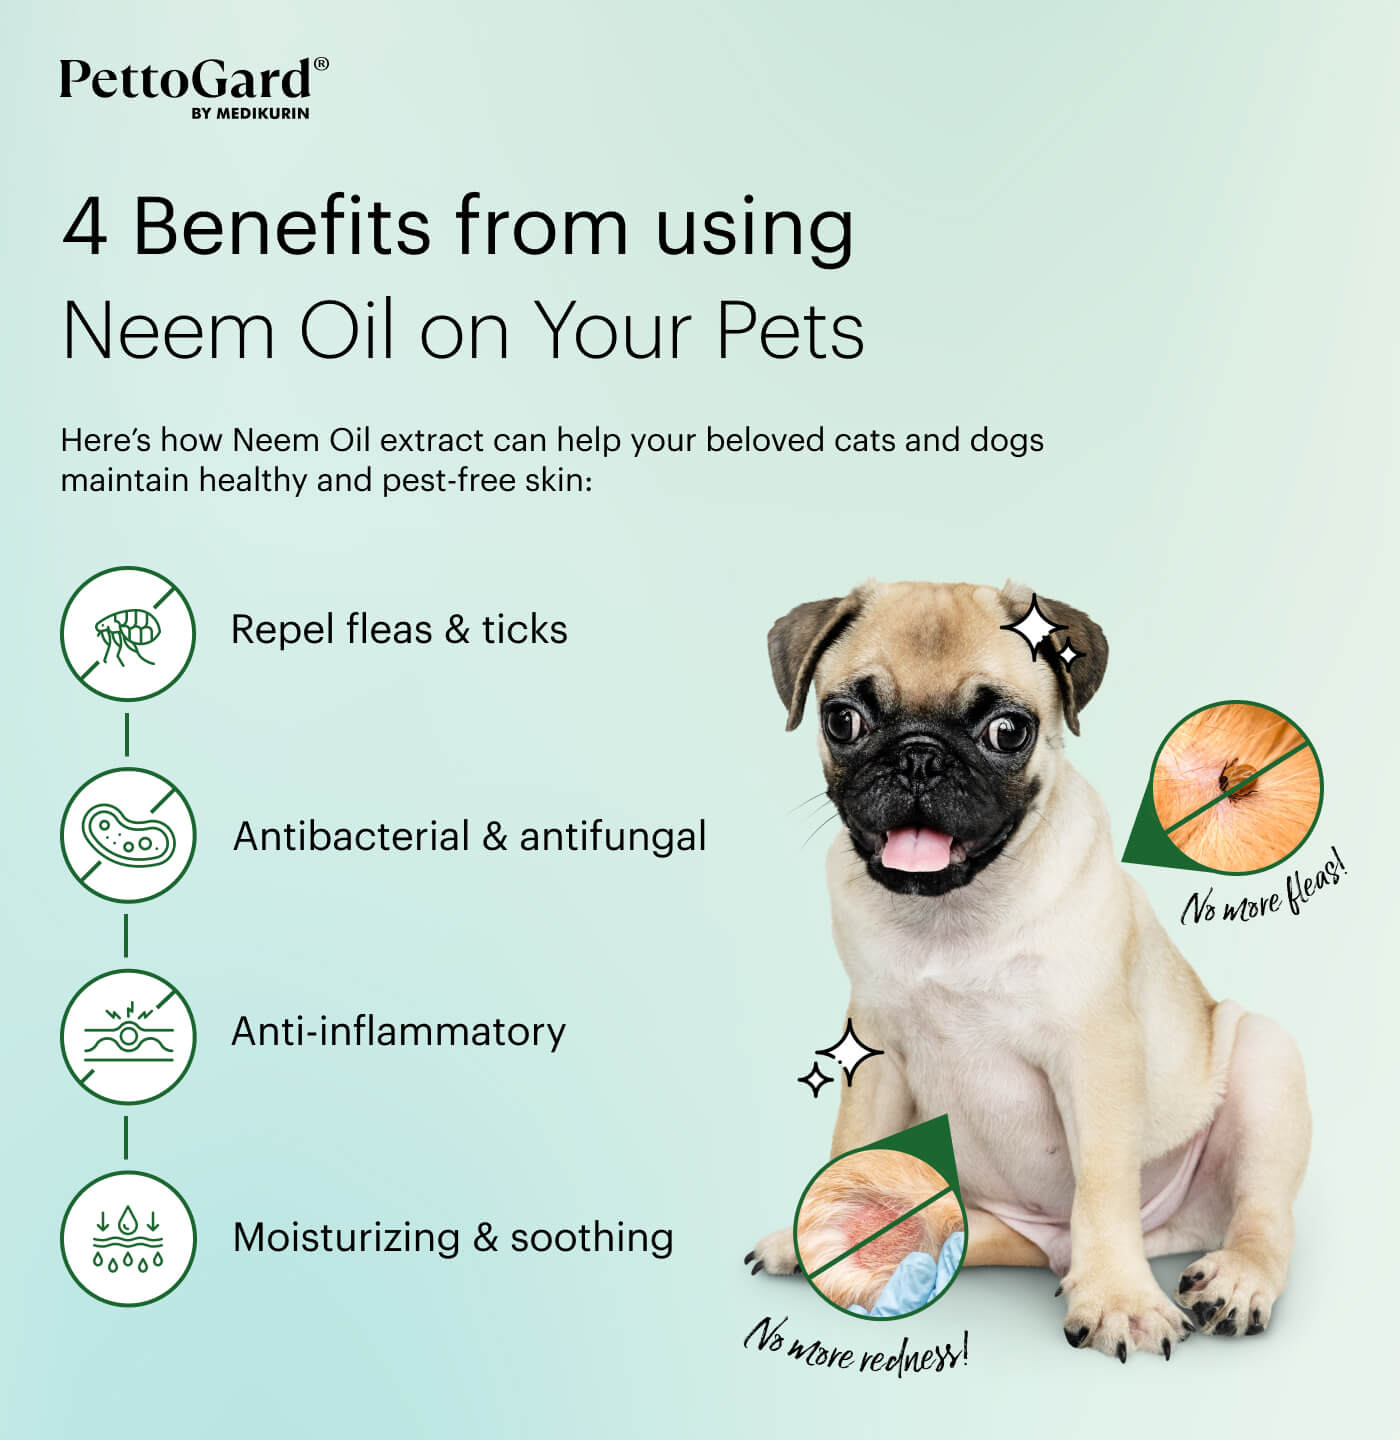 Benefits of Neem Oil for pets' skin and pest control